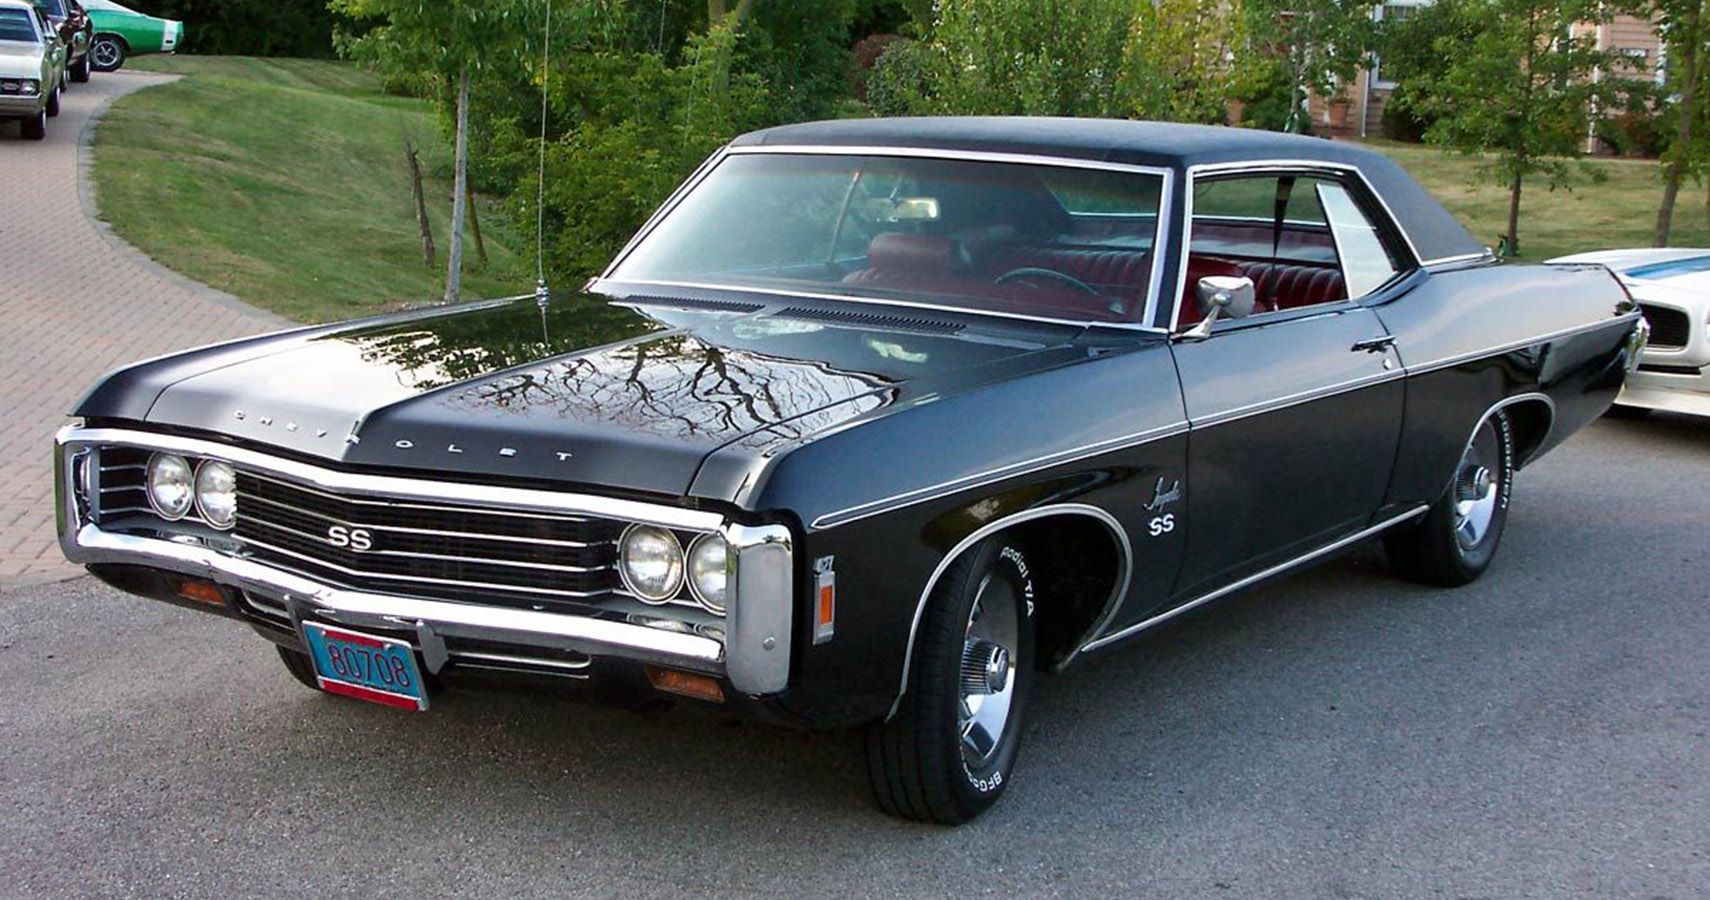 This Is How Much A 1969 Chevy Impala Goes For Today And Why It's A Collectible